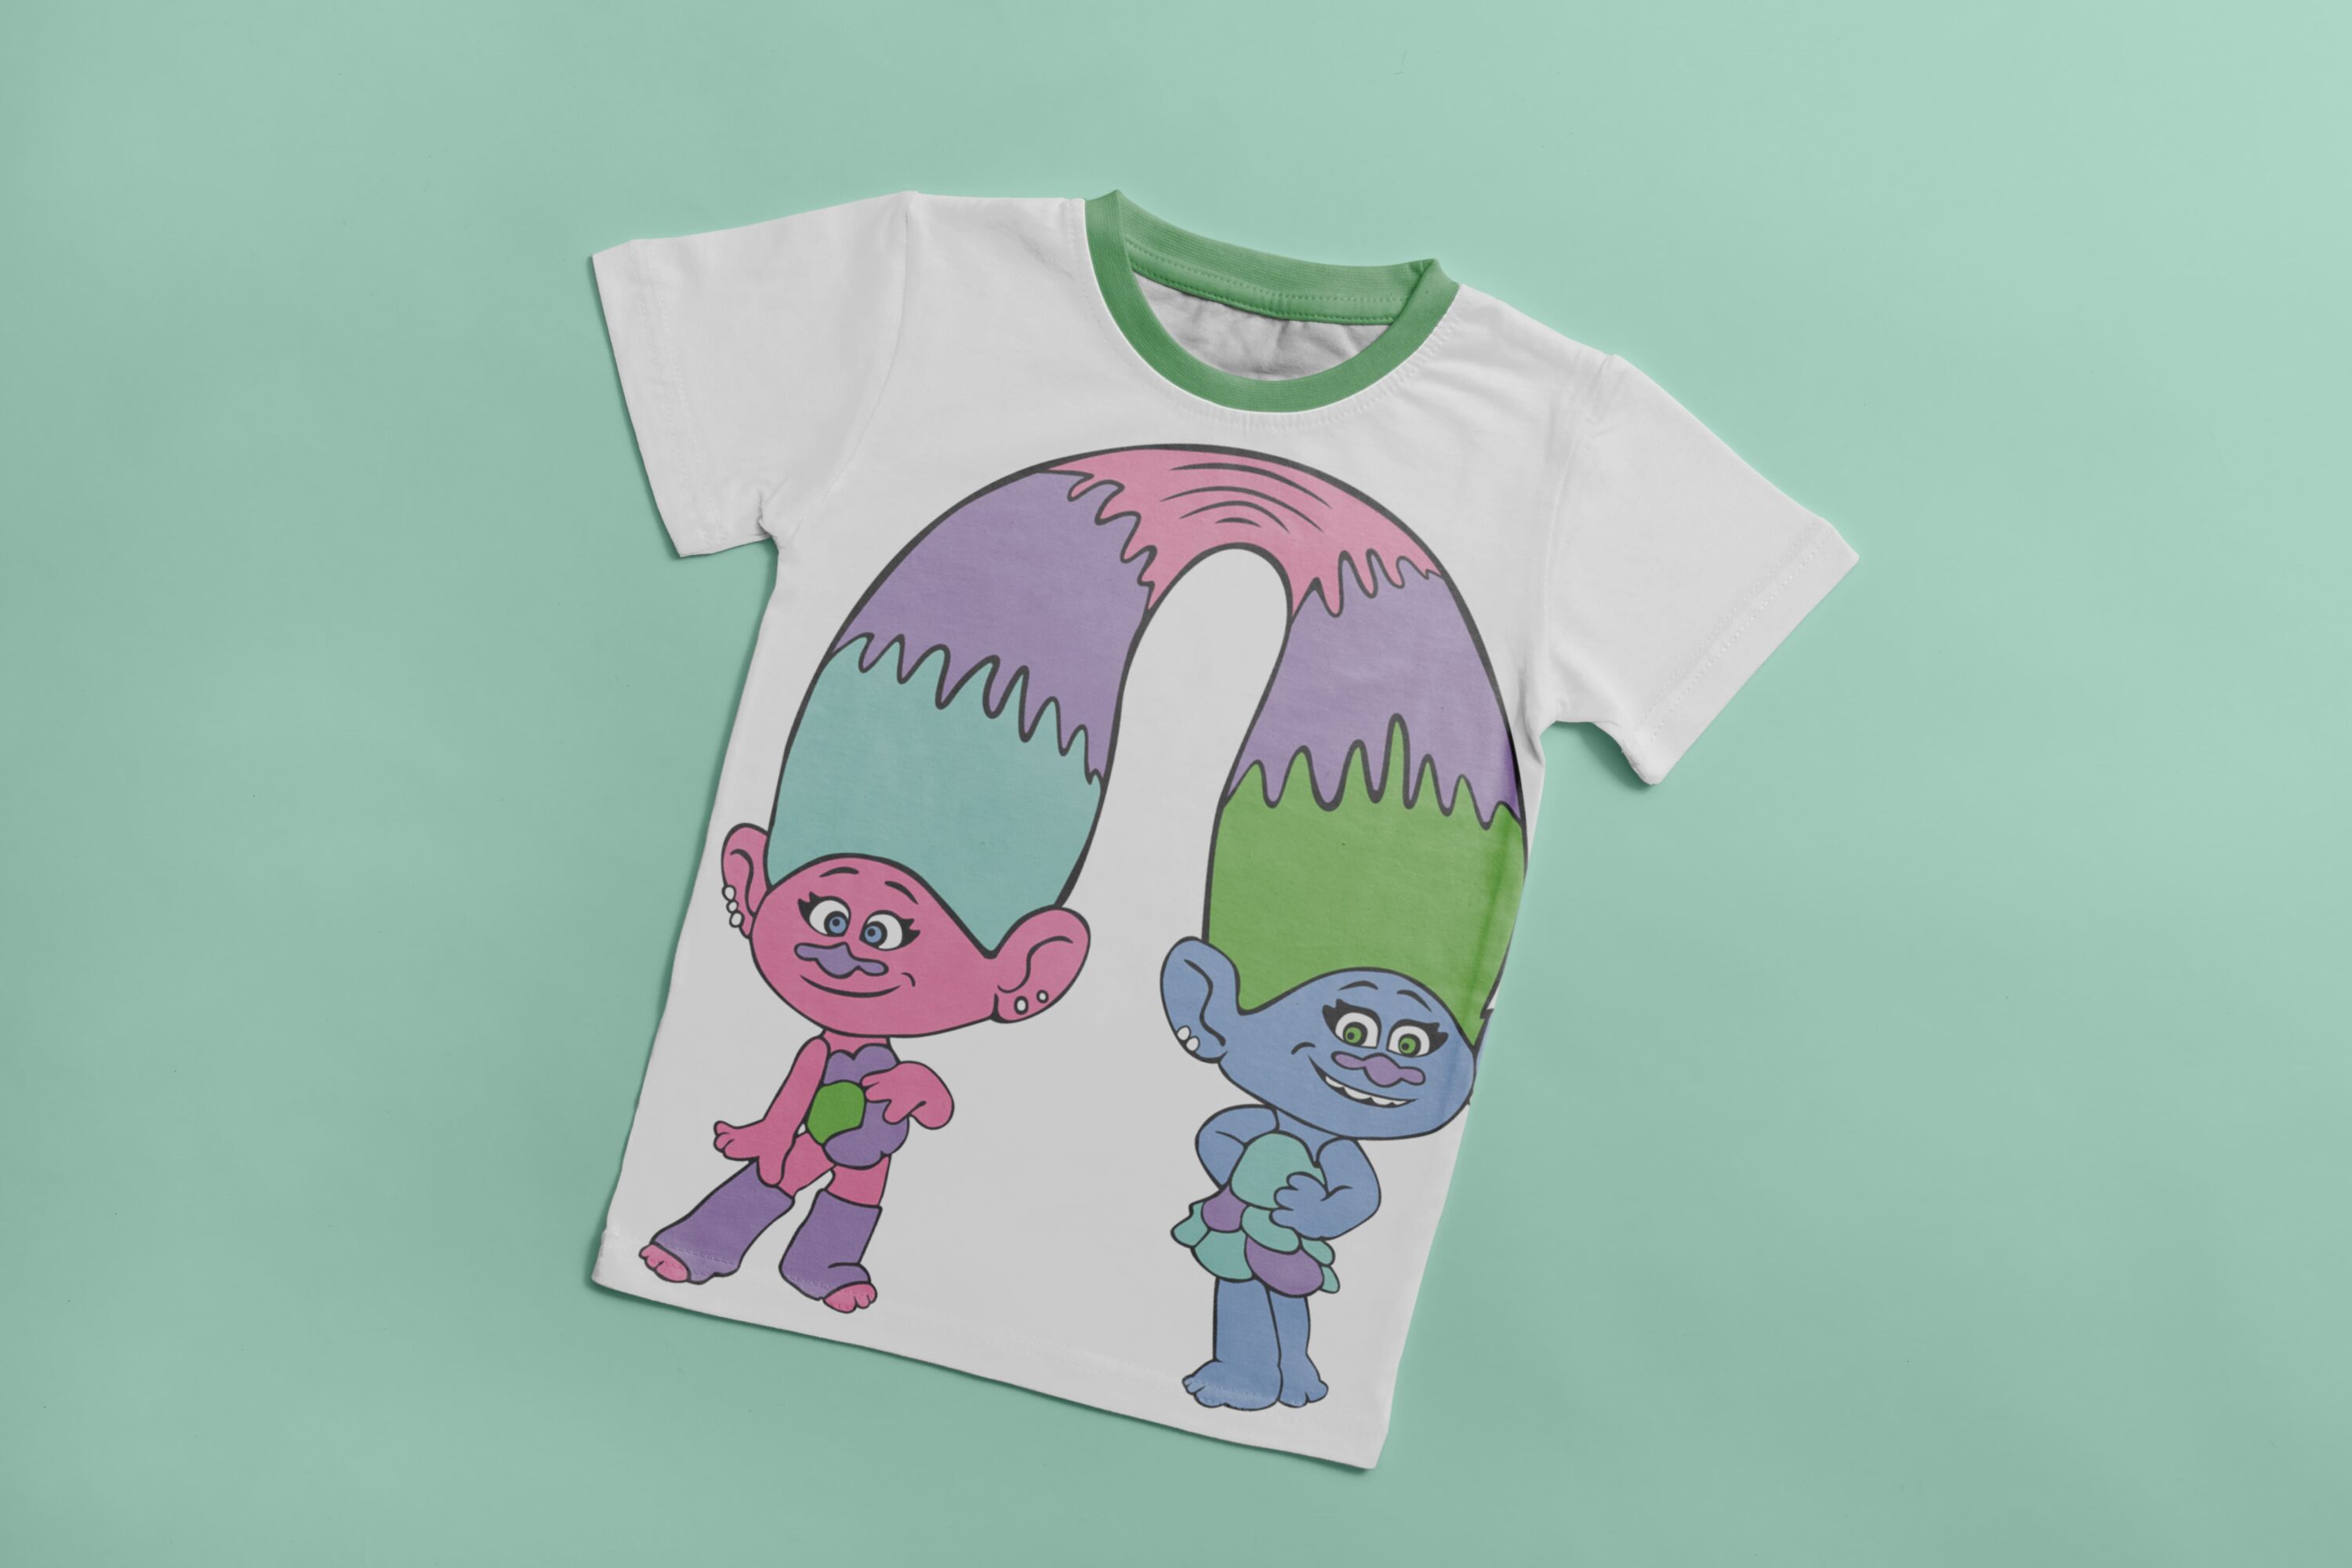 White T-shirt with green collar and image of cartoon character - Satin and Chenille.